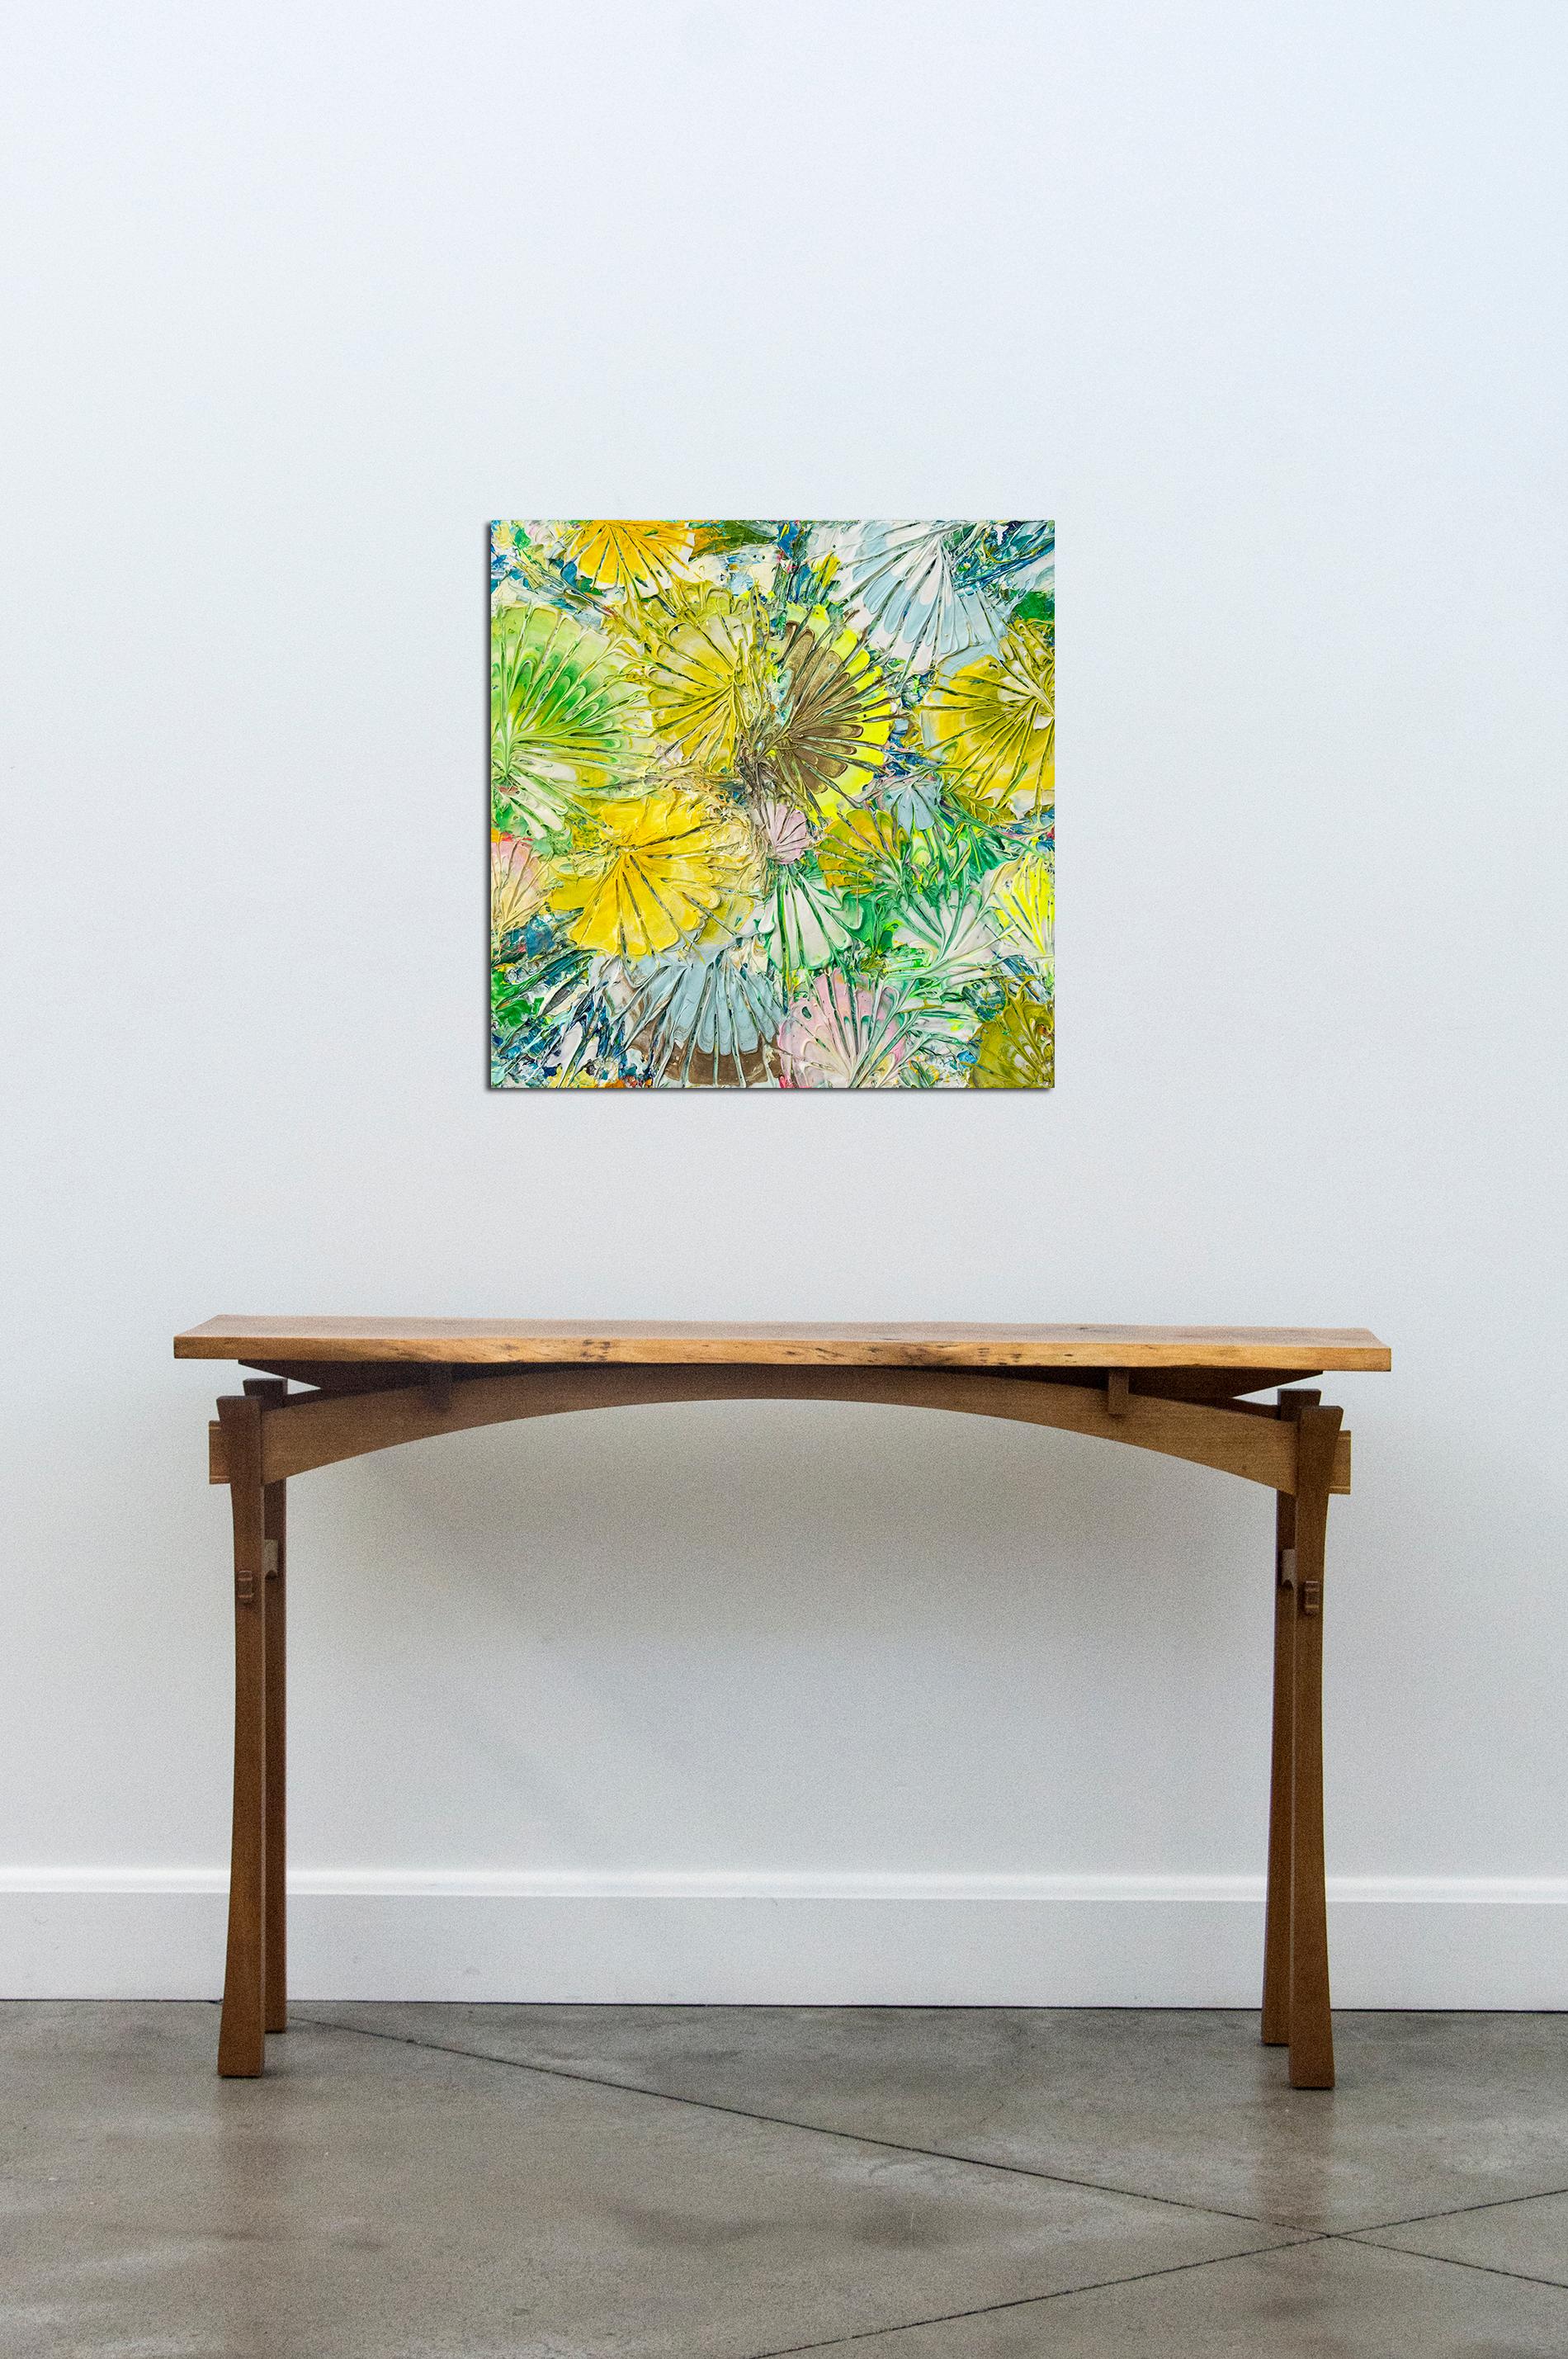 A floral motif in shades of pink, blue, green and lemon is used in an all over pattern by artist Adam Cohen in this delightfully bright painting. Cohen intersects the language of Abstract Expressionism with narrative to re-invent the experience of